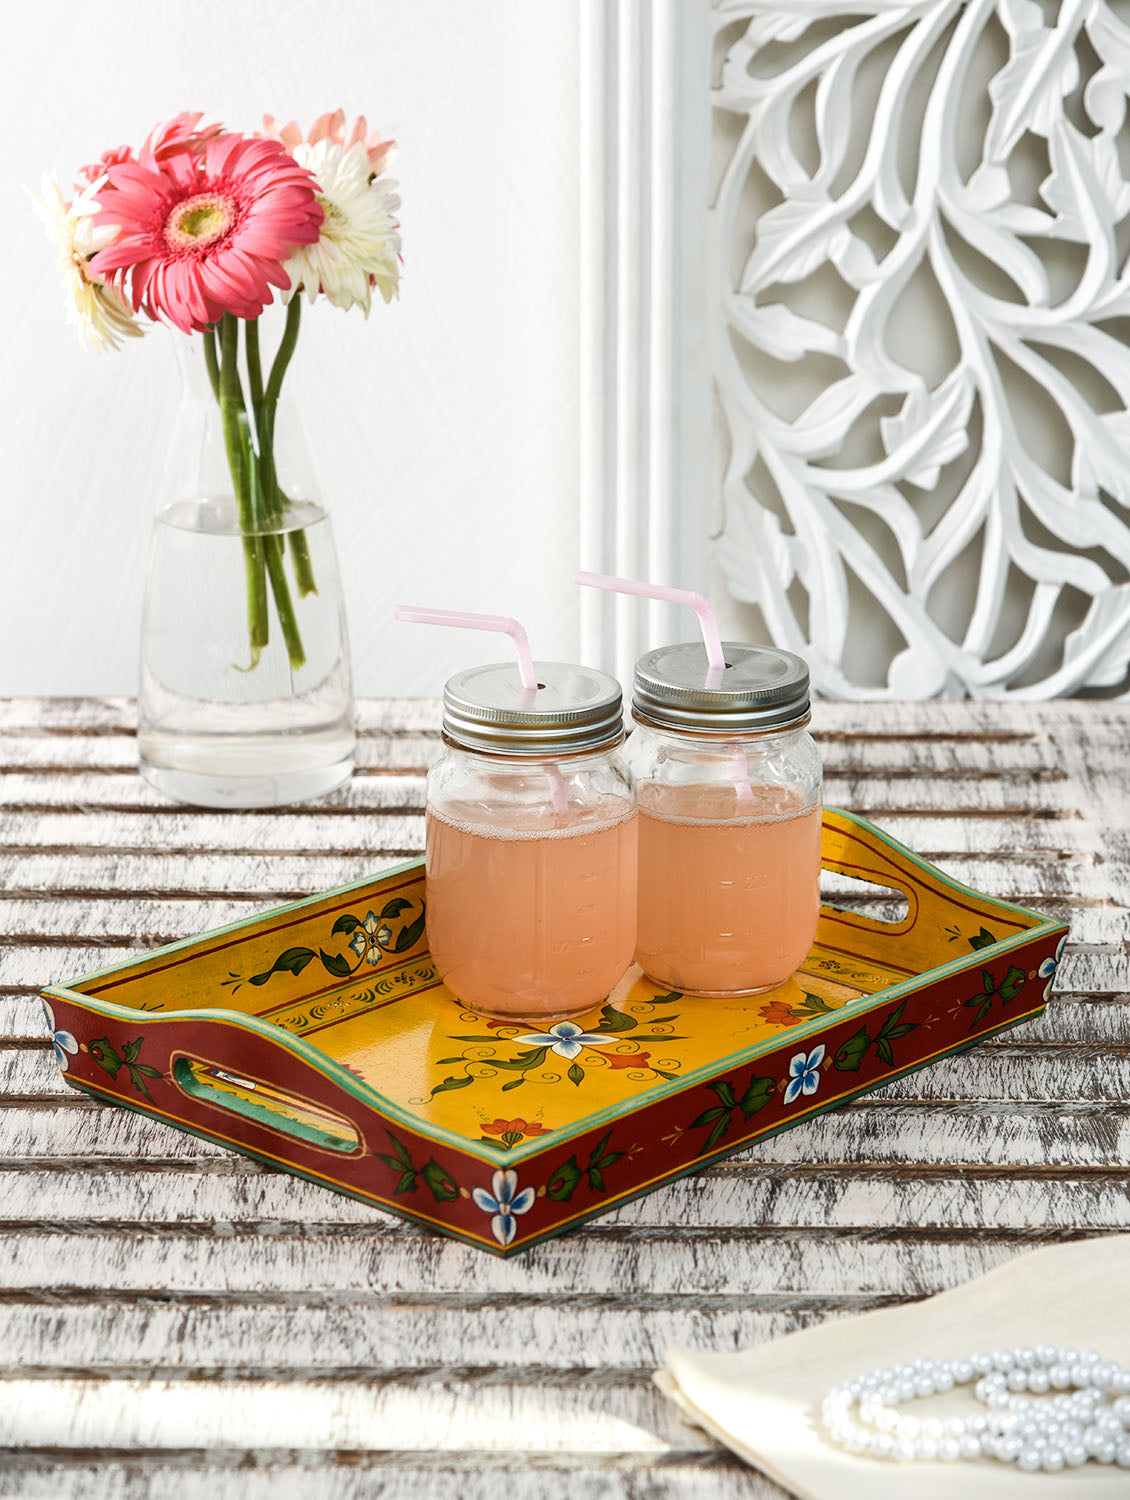 Hand Painted tray set of 2 : Mughal Floral